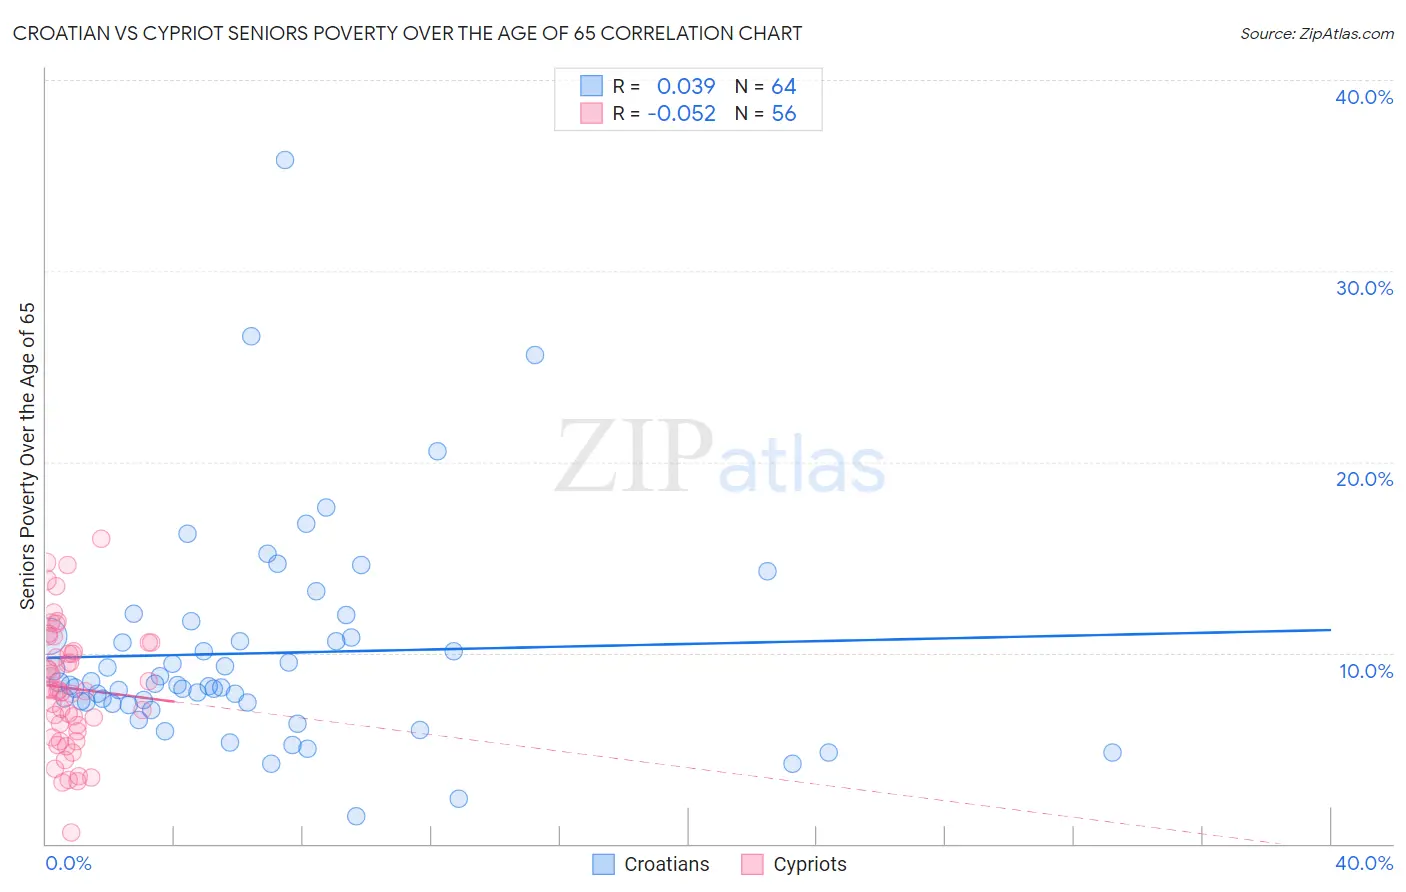 Croatian vs Cypriot Seniors Poverty Over the Age of 65